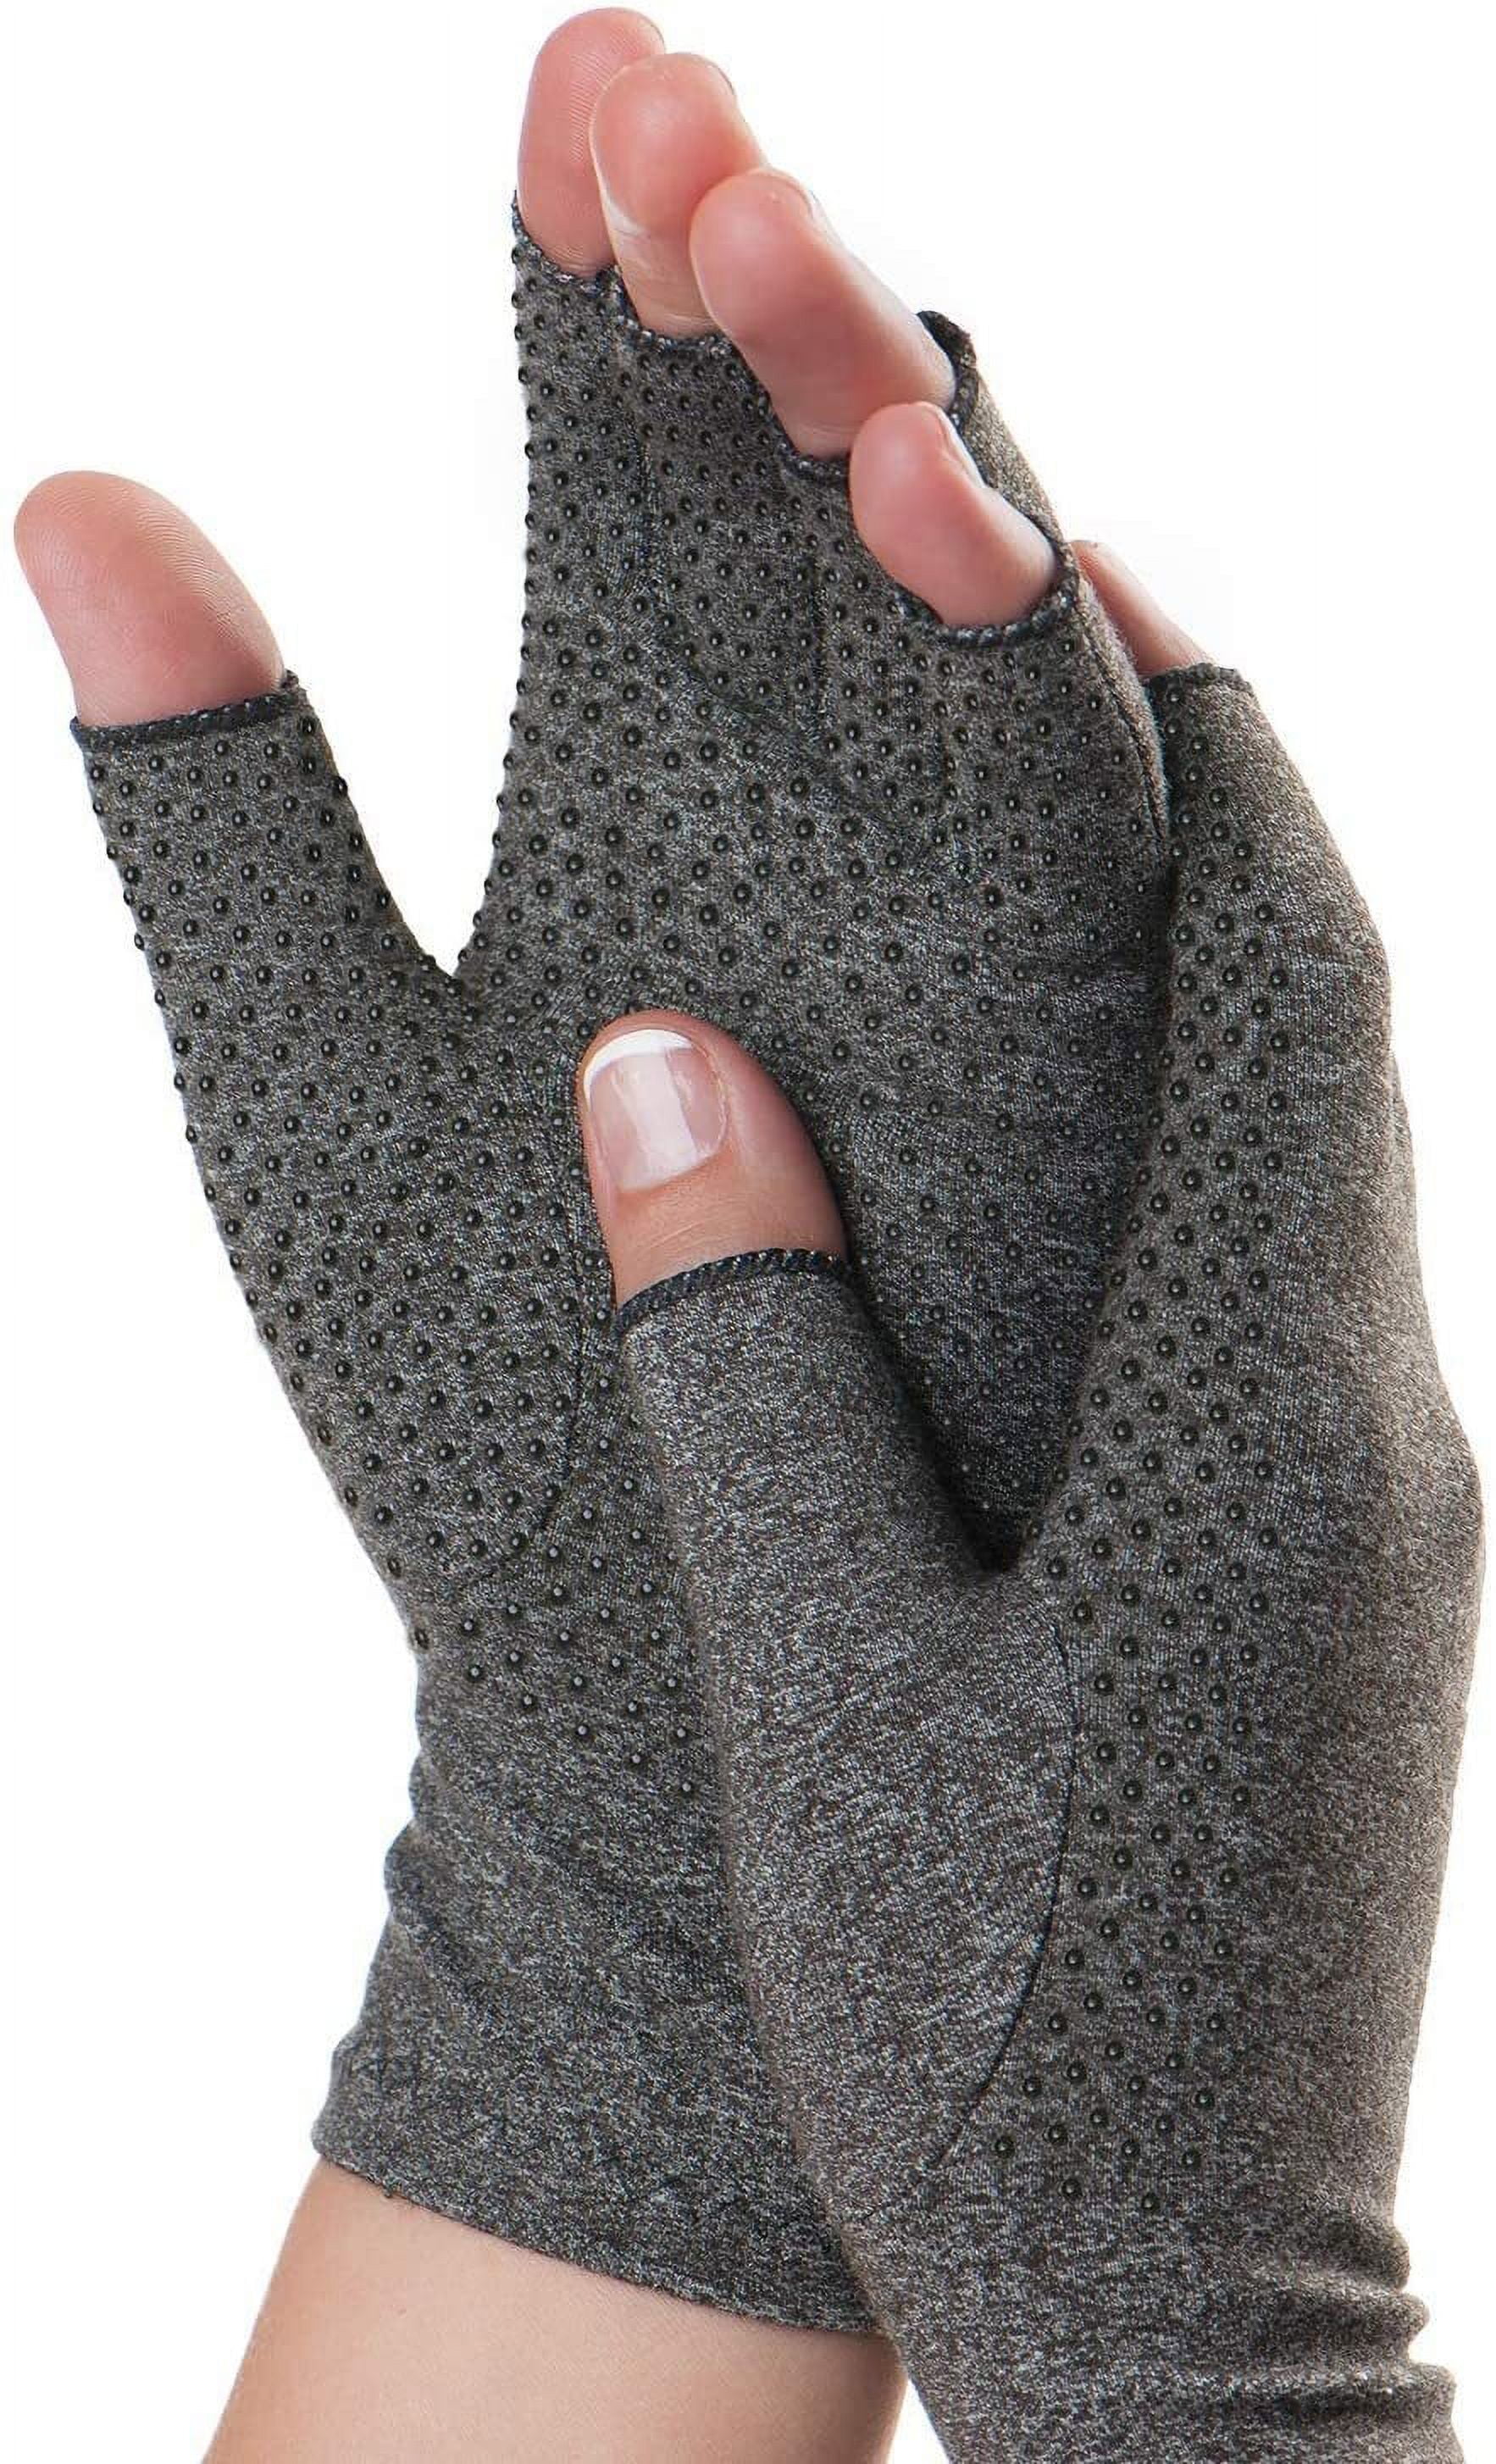 Aptoco Compressions Gloves Arthritis Therapy Fingerless Gloves Men and  Women Hand Support for Joint Pain Relief Gray L, Valentines Day Gifts for  Men 